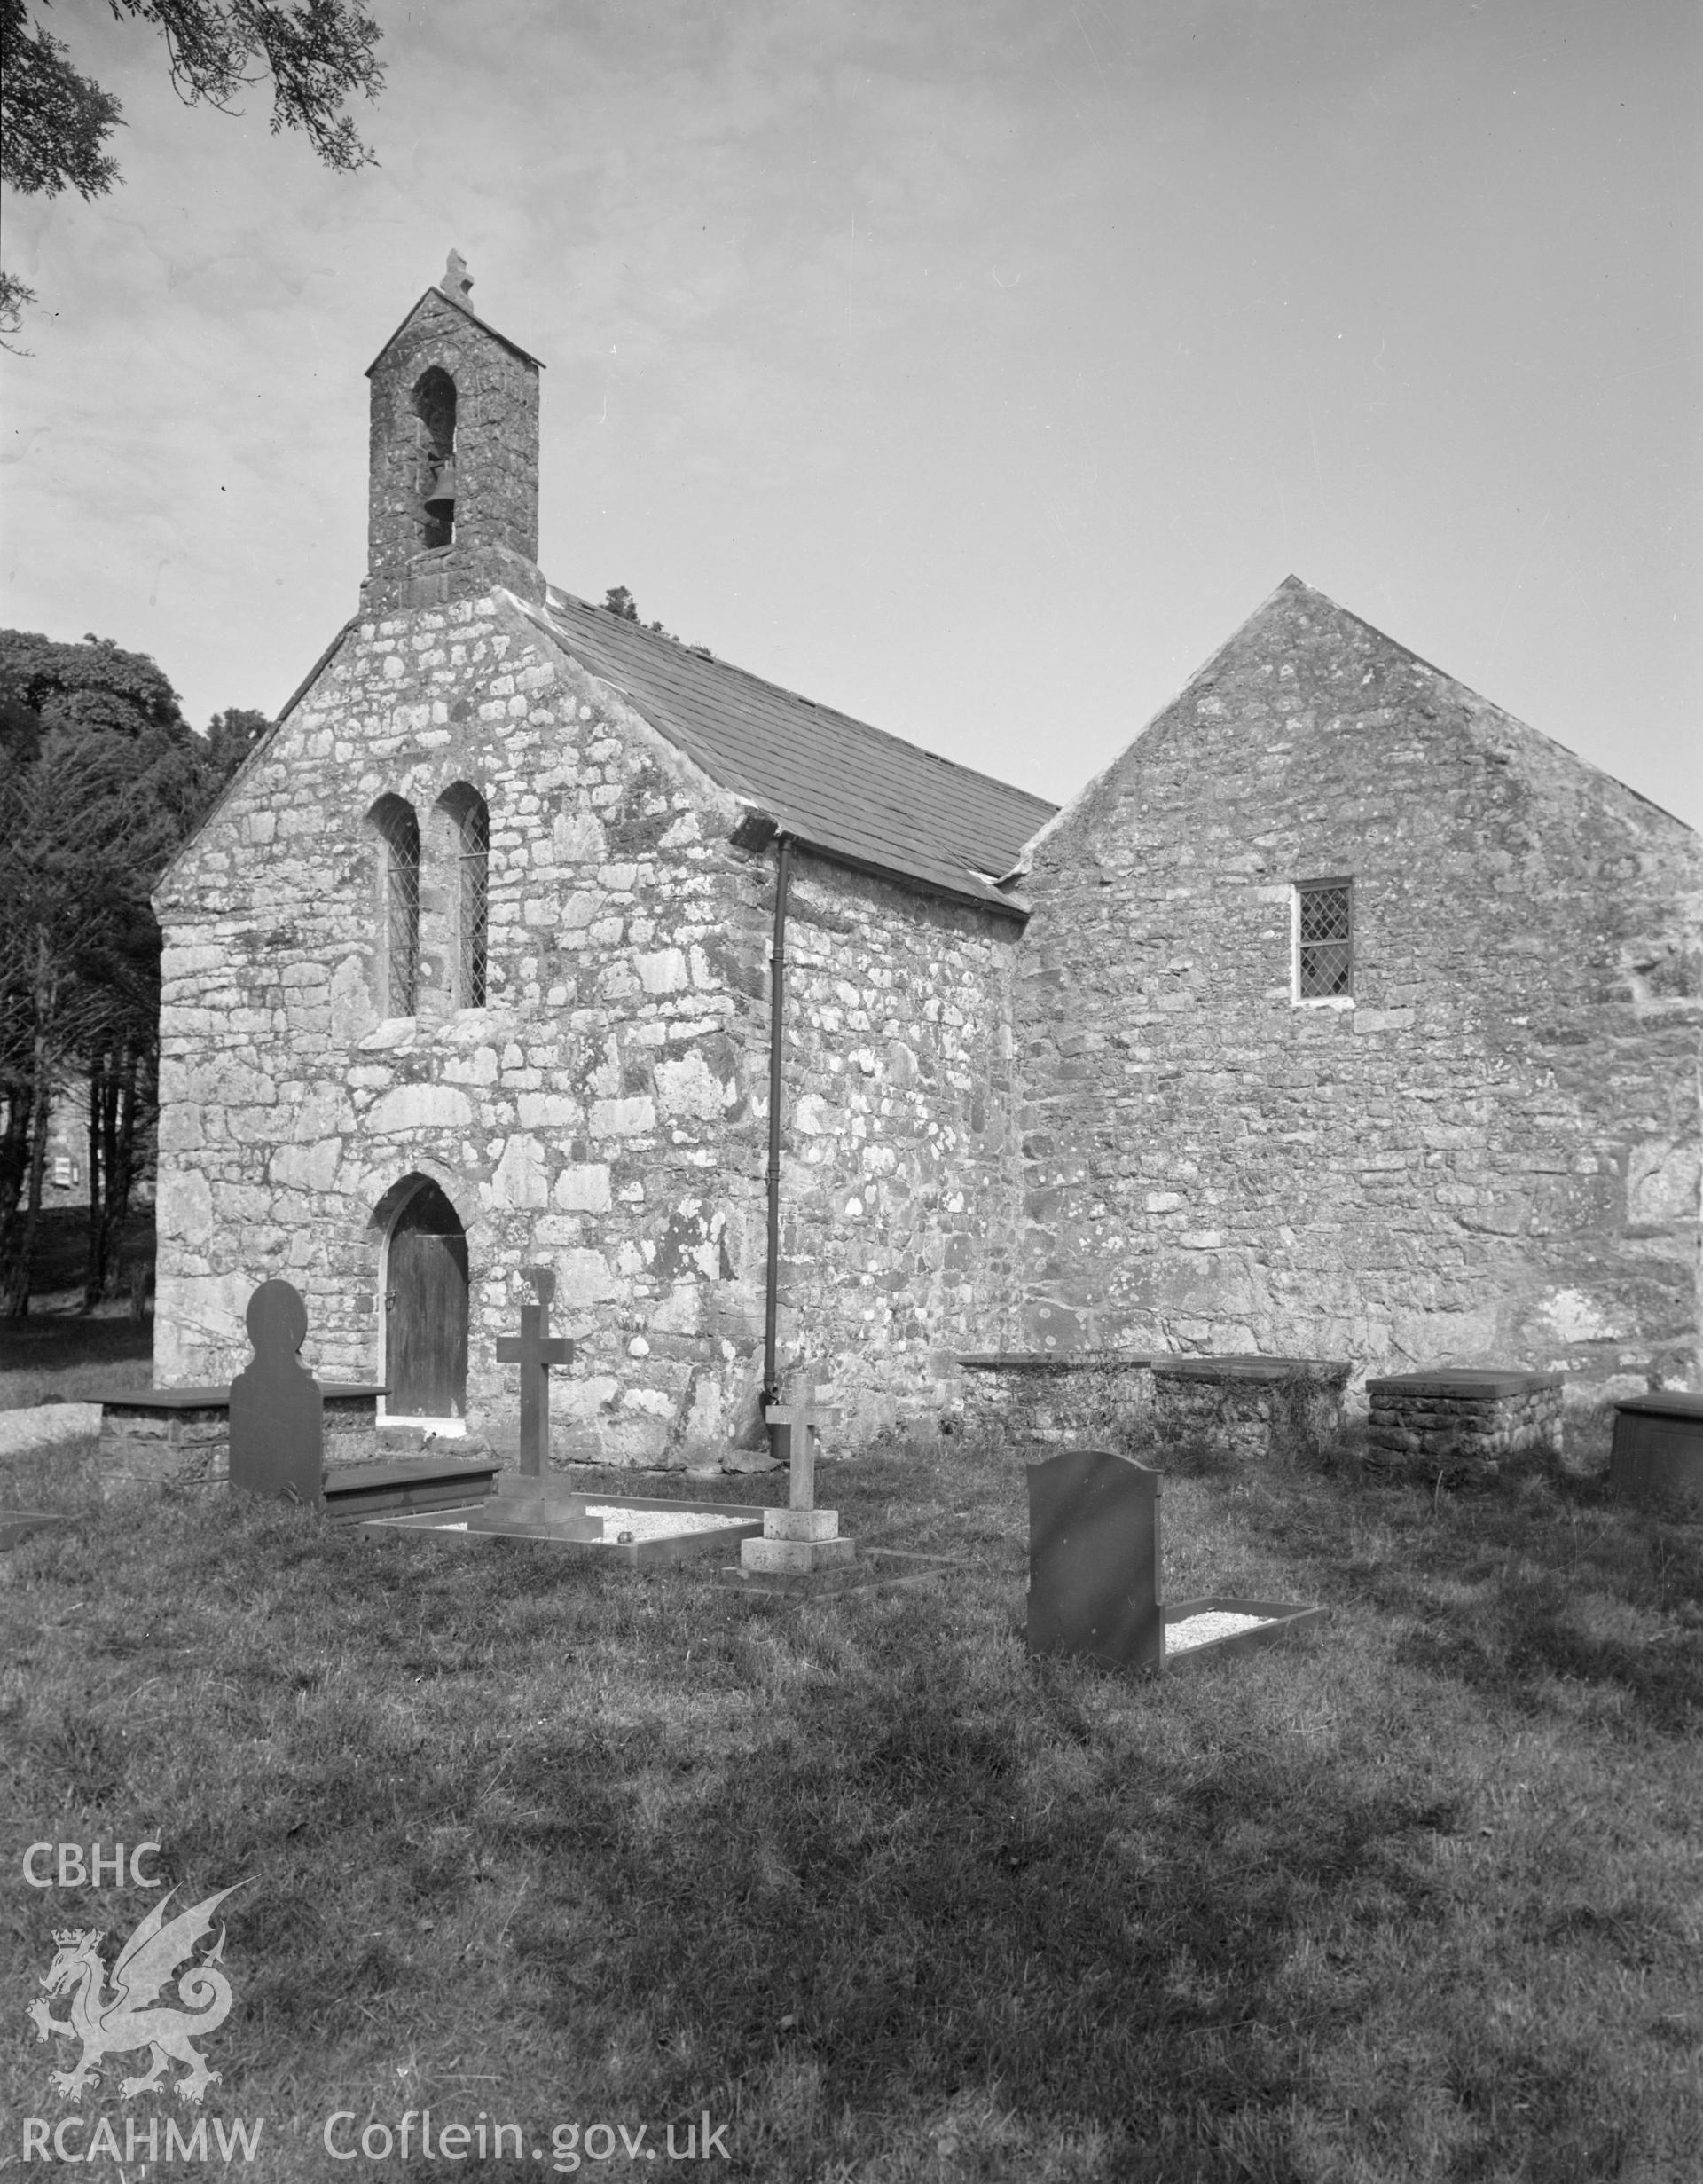 Black and white nitrate negative showing exterior view of Llaniestyn Church.